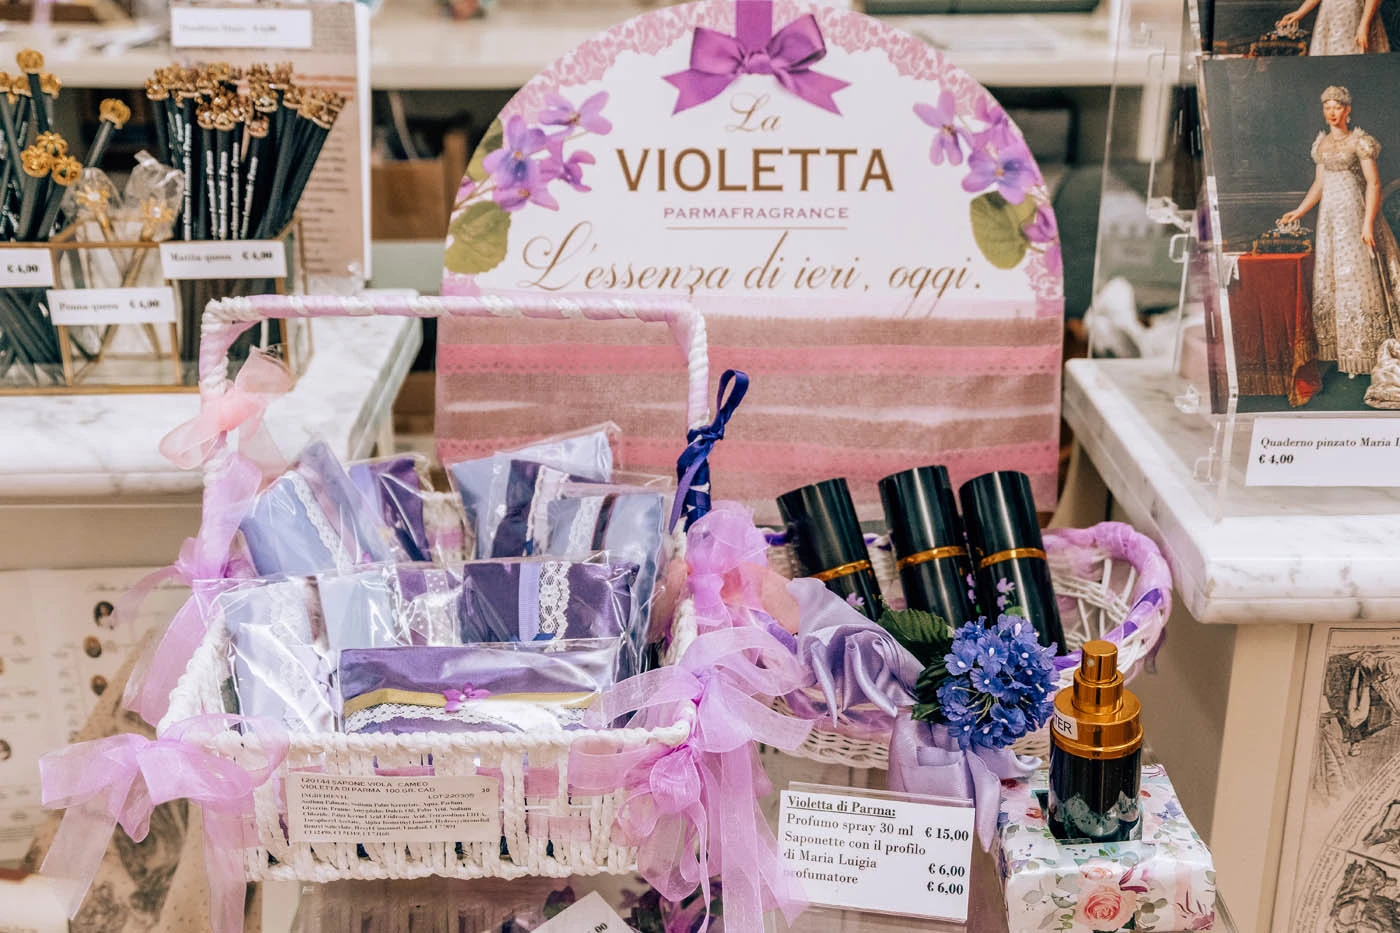 BEST Things to do in Parma Italy - Violetta di Parma fragrance